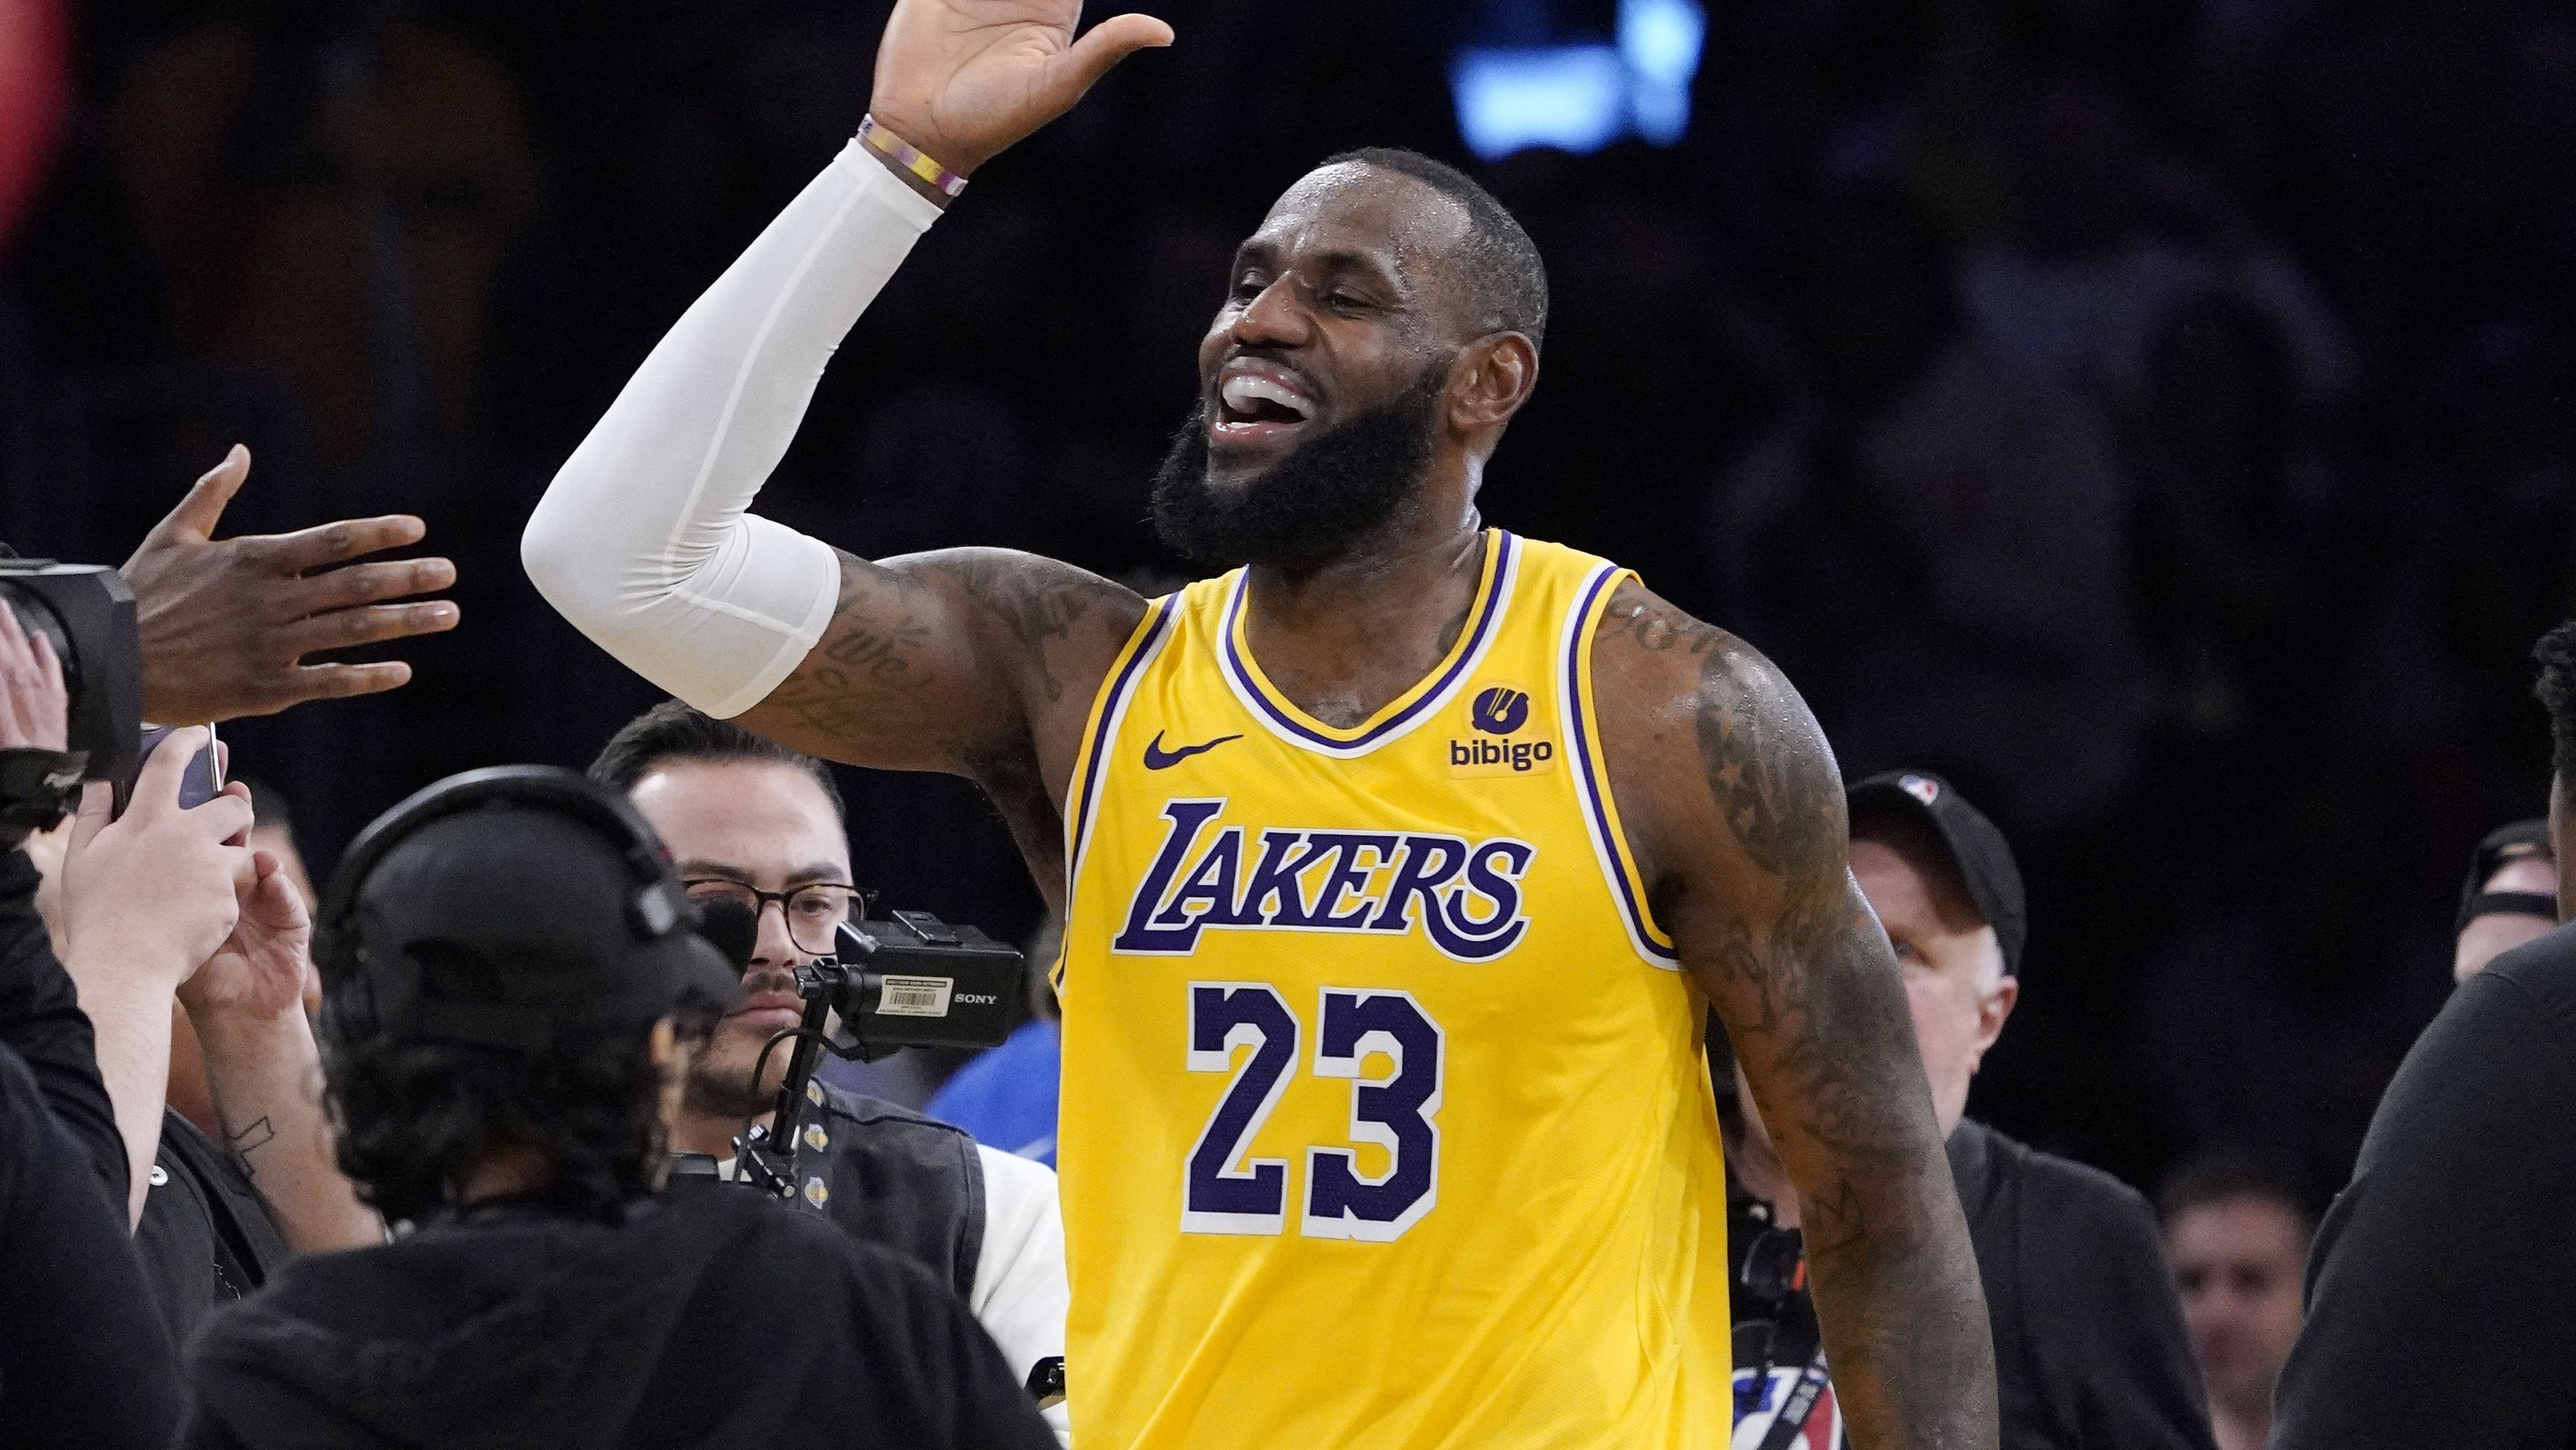 Los Angeles Lakers forward LeBron James celebrates after the Lakers defeated the Los Angeles Clippers 130-125 in an NBA basketball game Wednesday, Nov. 1, 2023, in Los Angeles. (AP Photo/Mark J. Terrill)